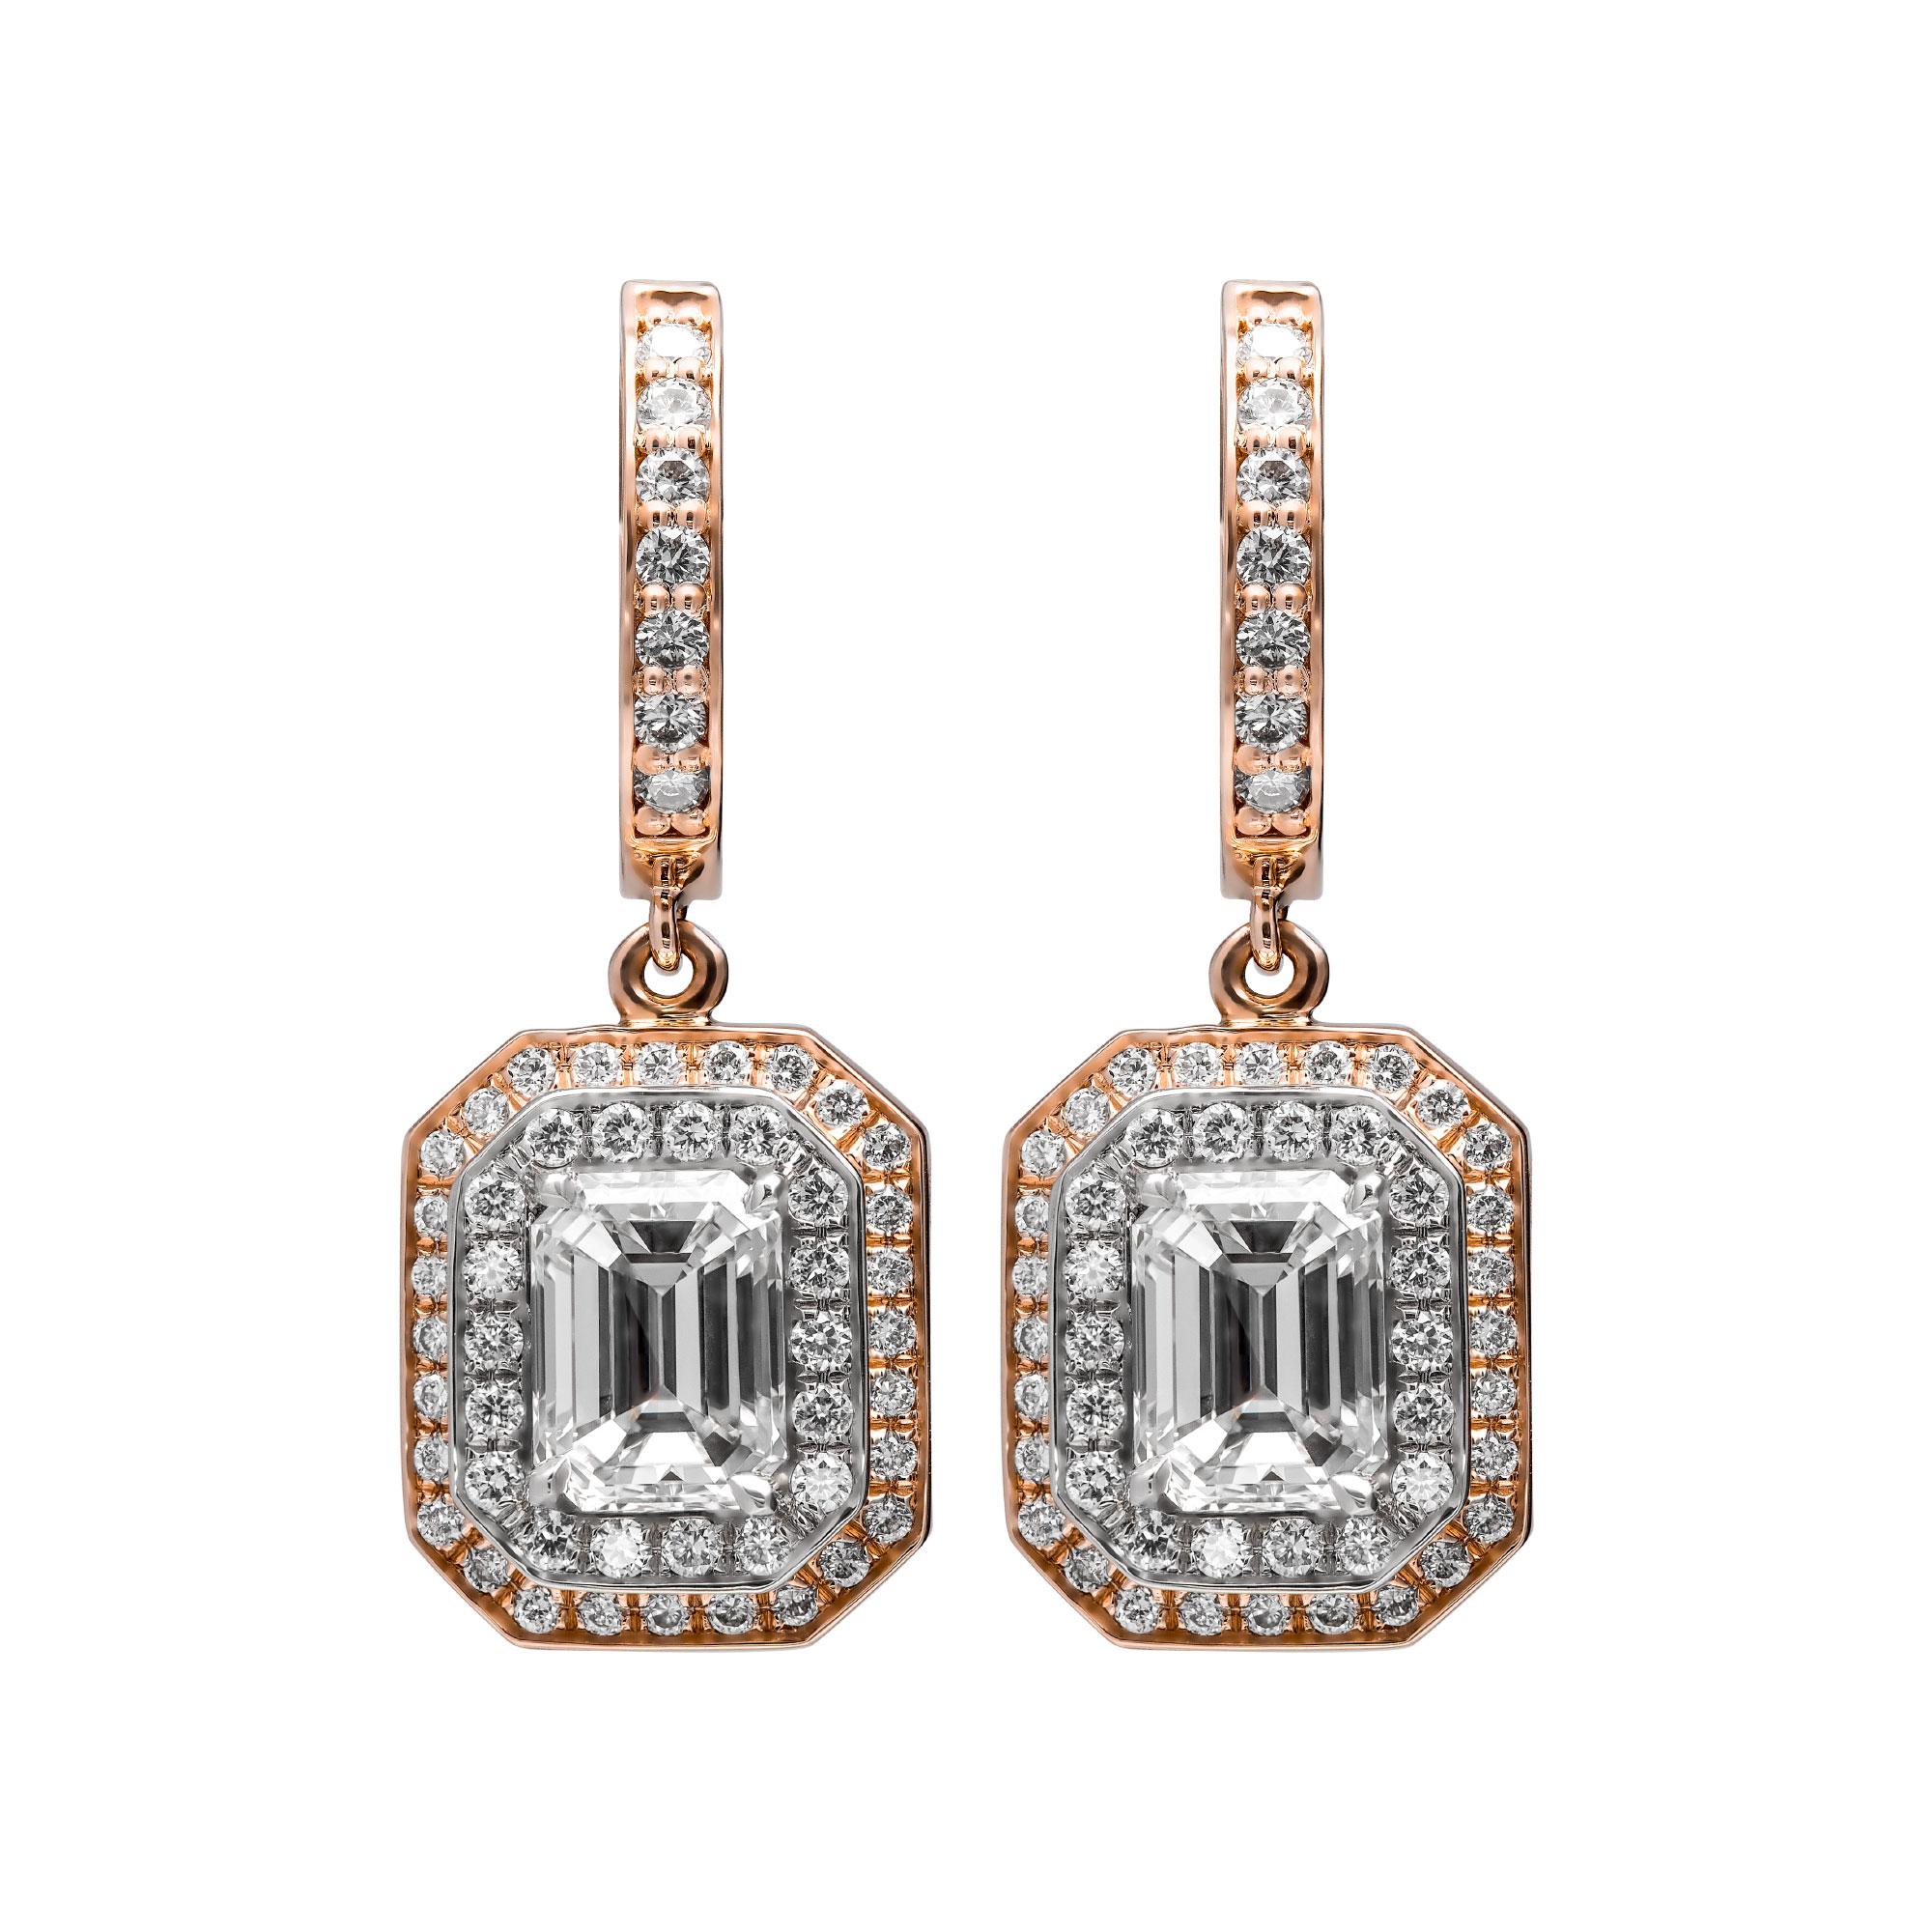 Classic, bold and elegant, these earrings will go great with evening attire or for every day wear
Mounted in 14K Rose and 14K White gold, these earrings featuring exceptional pave work , encrusted with almost 1.79ct of white full brilliant cut